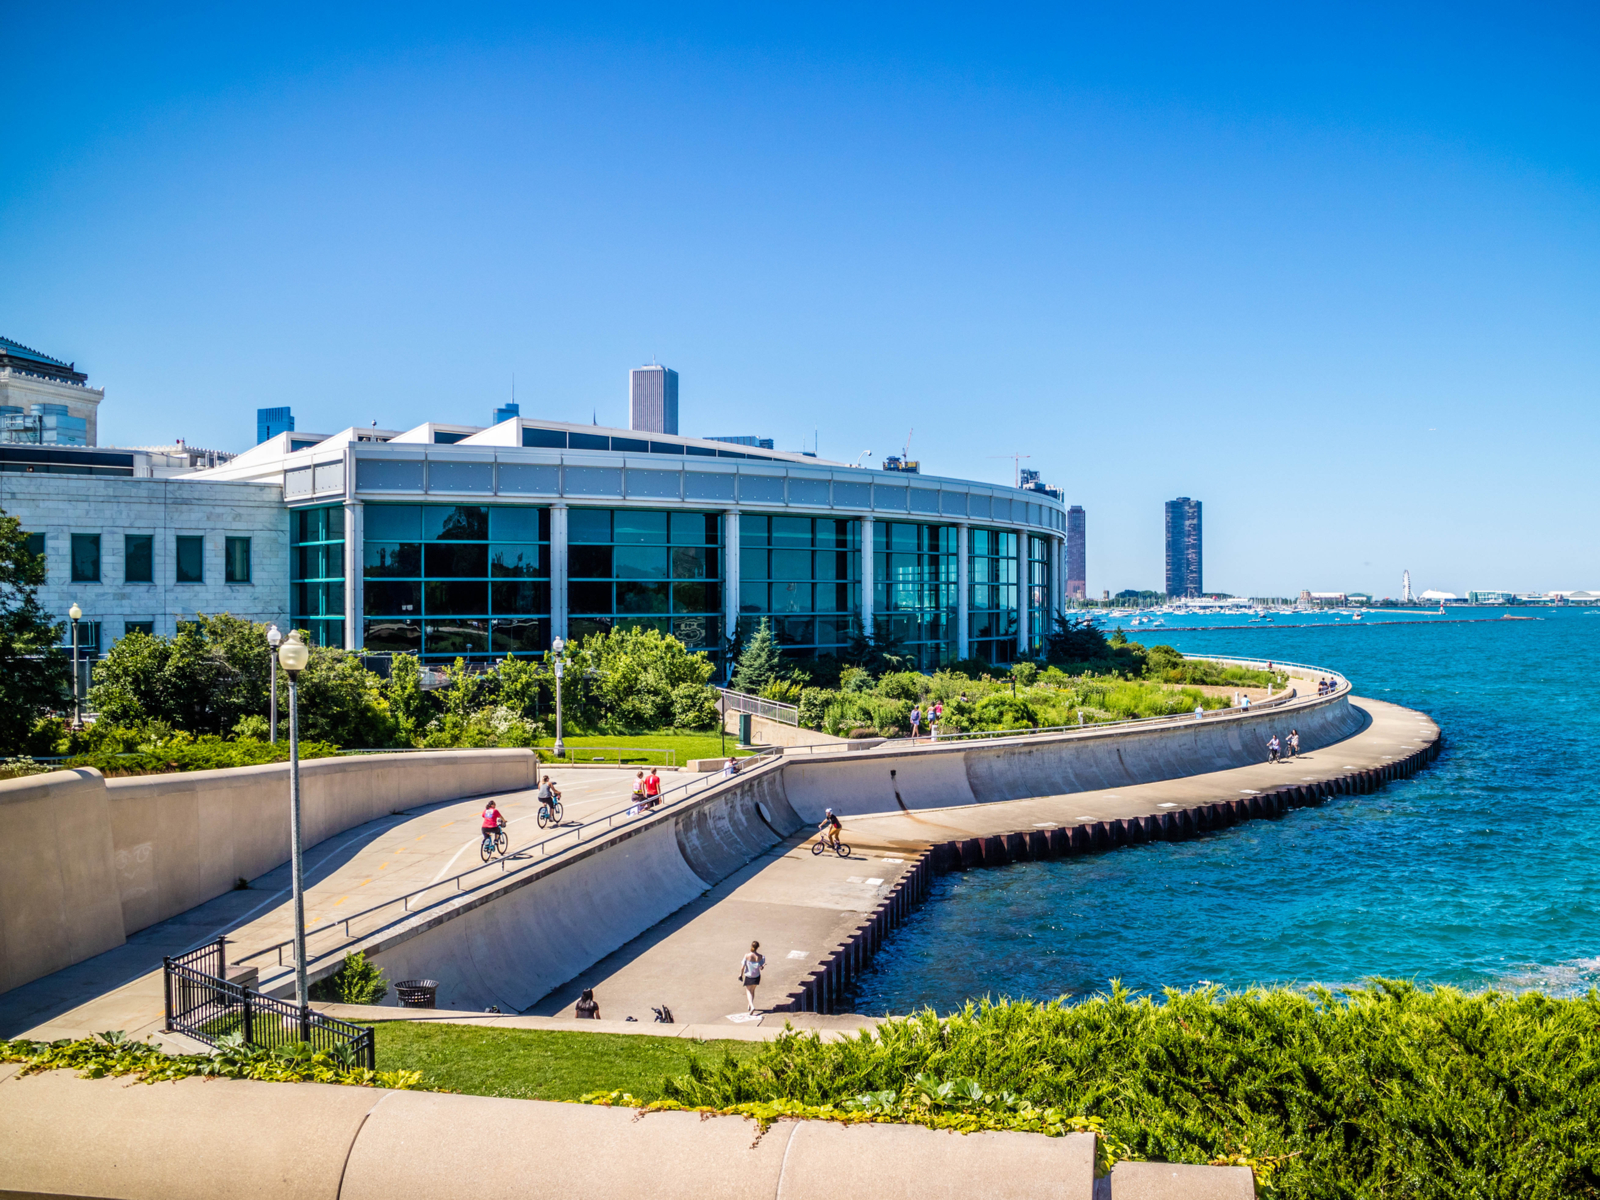 Photo of the famous Shedd Aquarium on Lake Michigan, one of the best things to do in Chicago